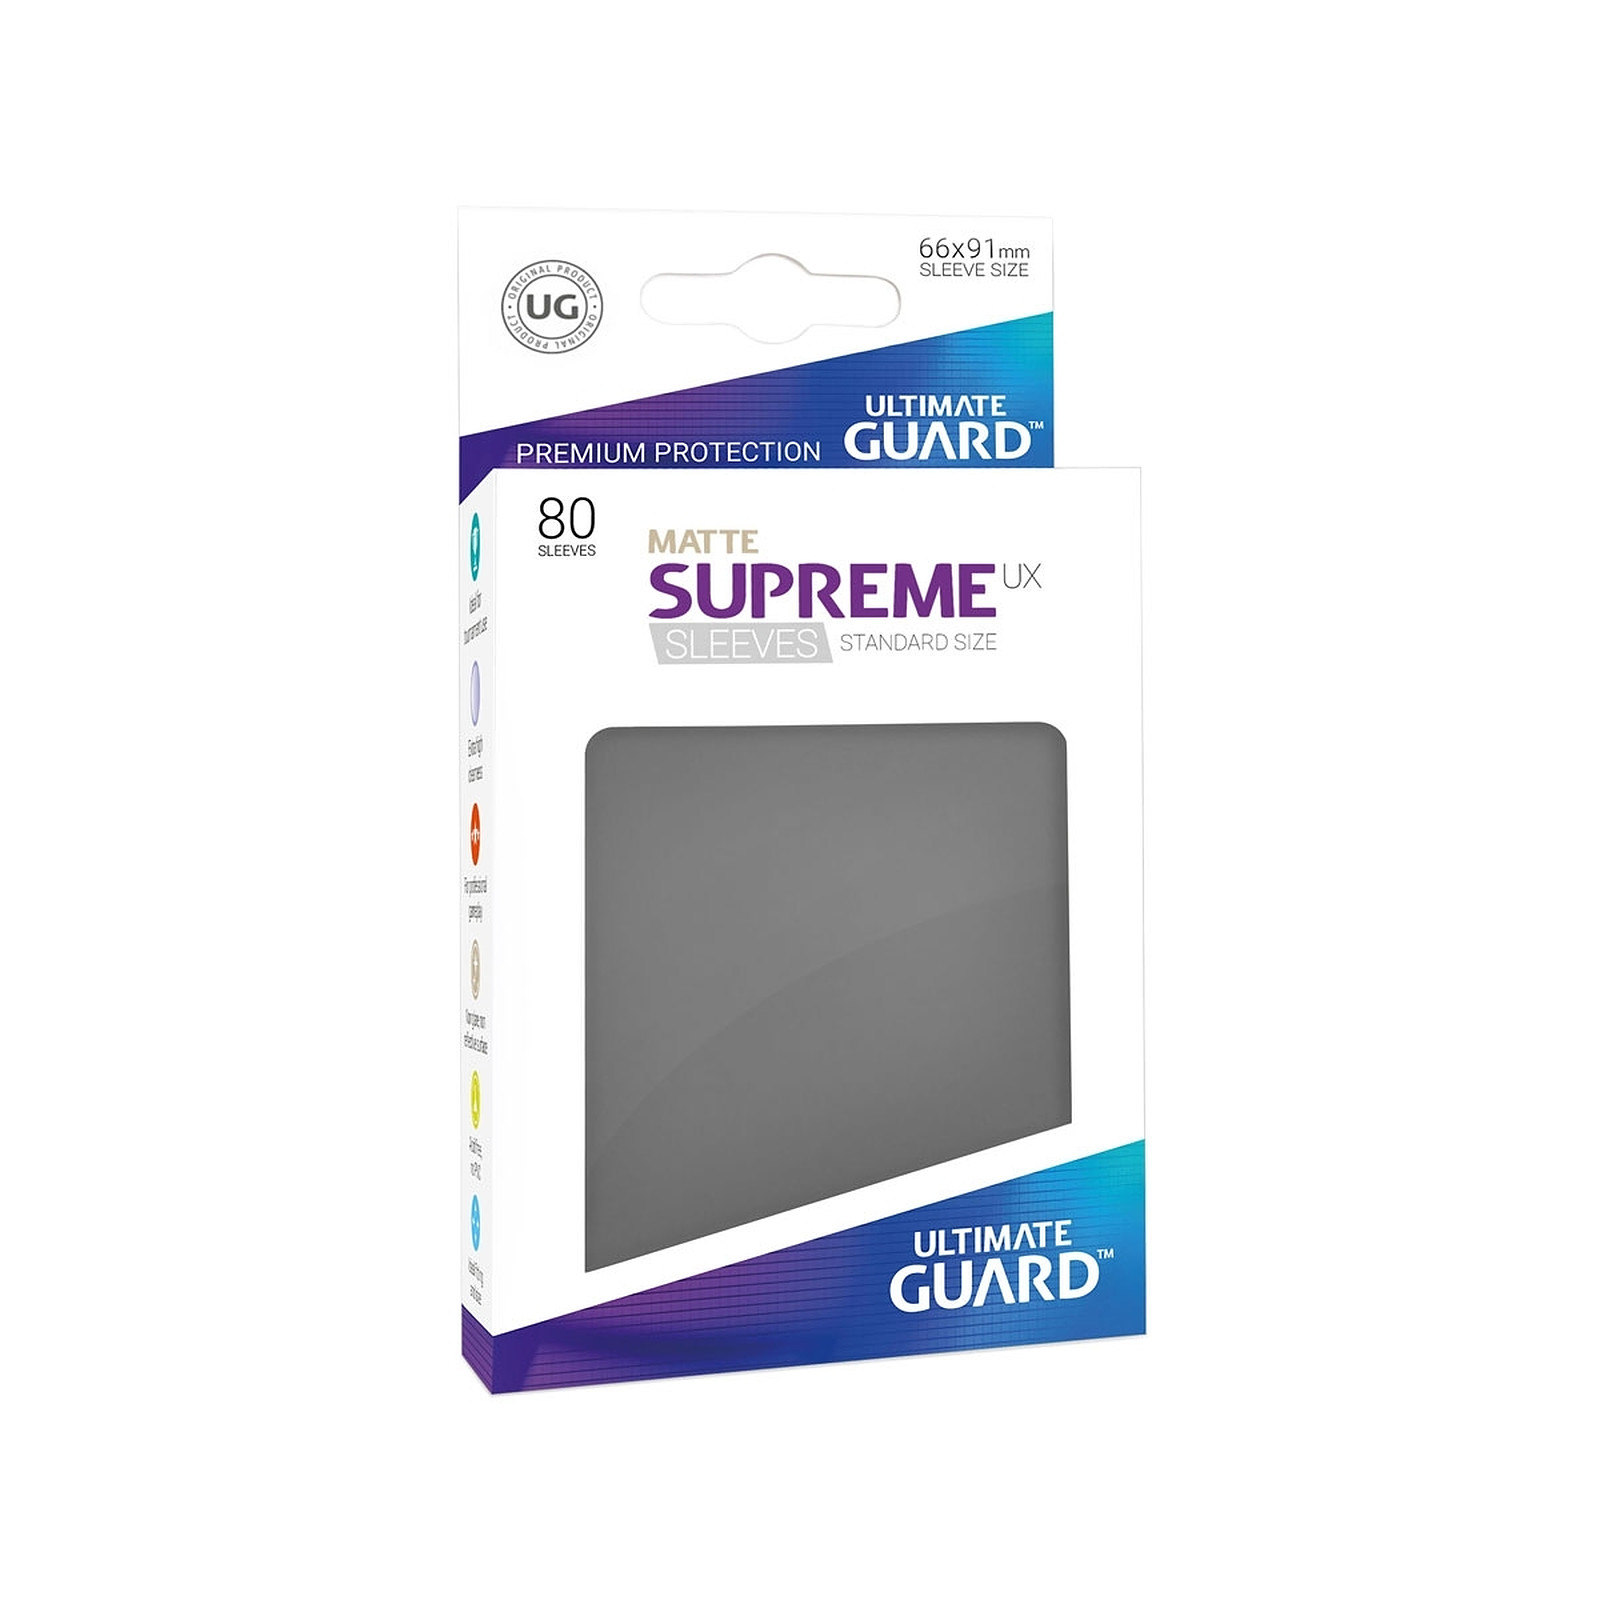 Ultimate Guard - 80 pochettes Supreme UX Sleeves taille standard Gris Fonca© Mat - Accessoire jeux Ultimate Guard